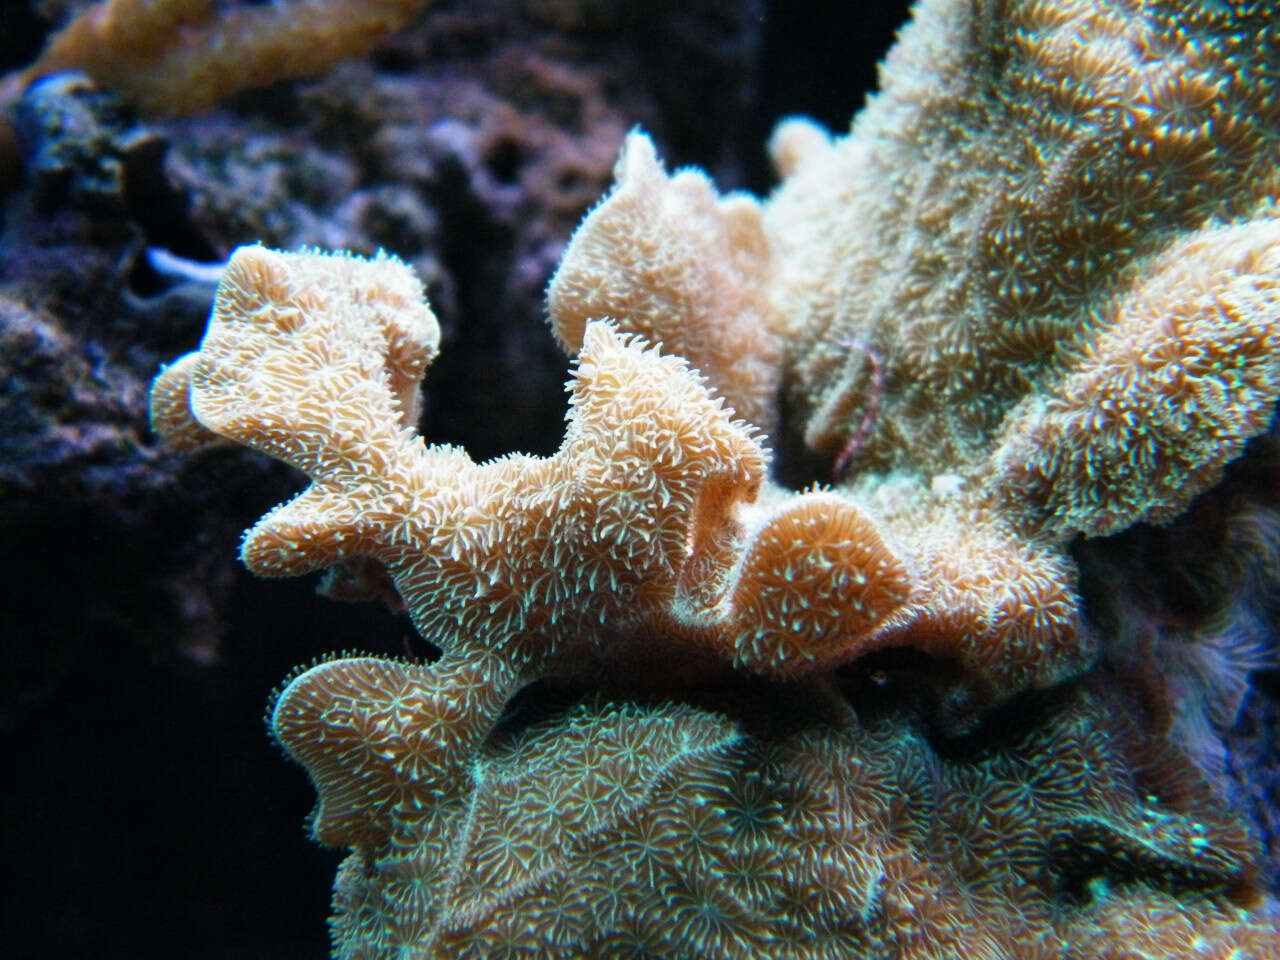 Image of Pavona coral